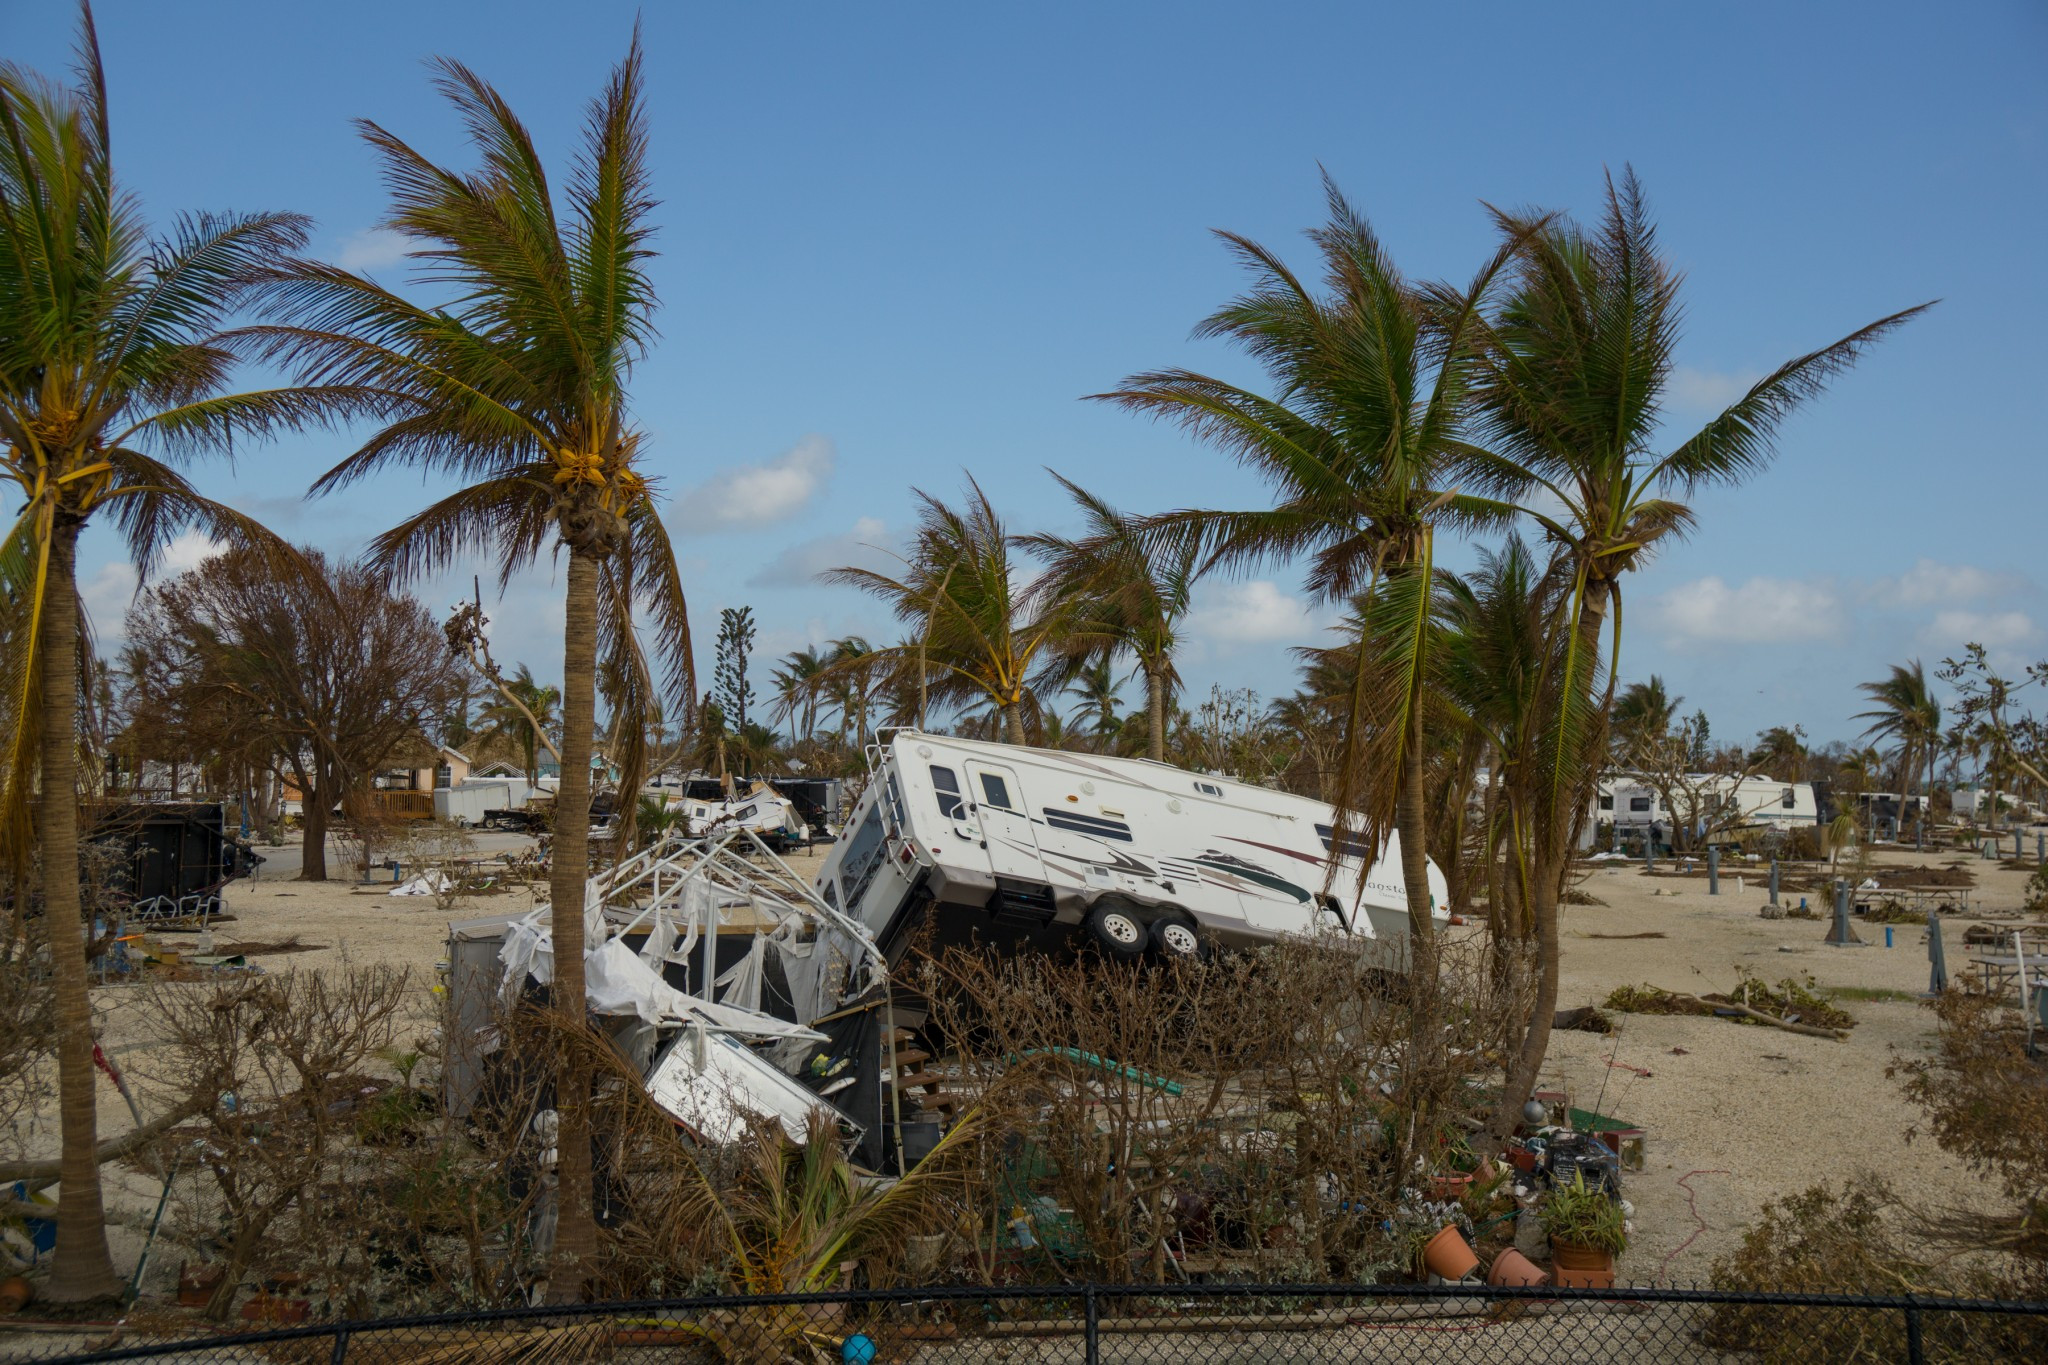 The International Boxing Association claims its Year of the Caribbean 2018 initiative will take on even greater significance following the devastation caused by Hurricane Irma ©Getty Images